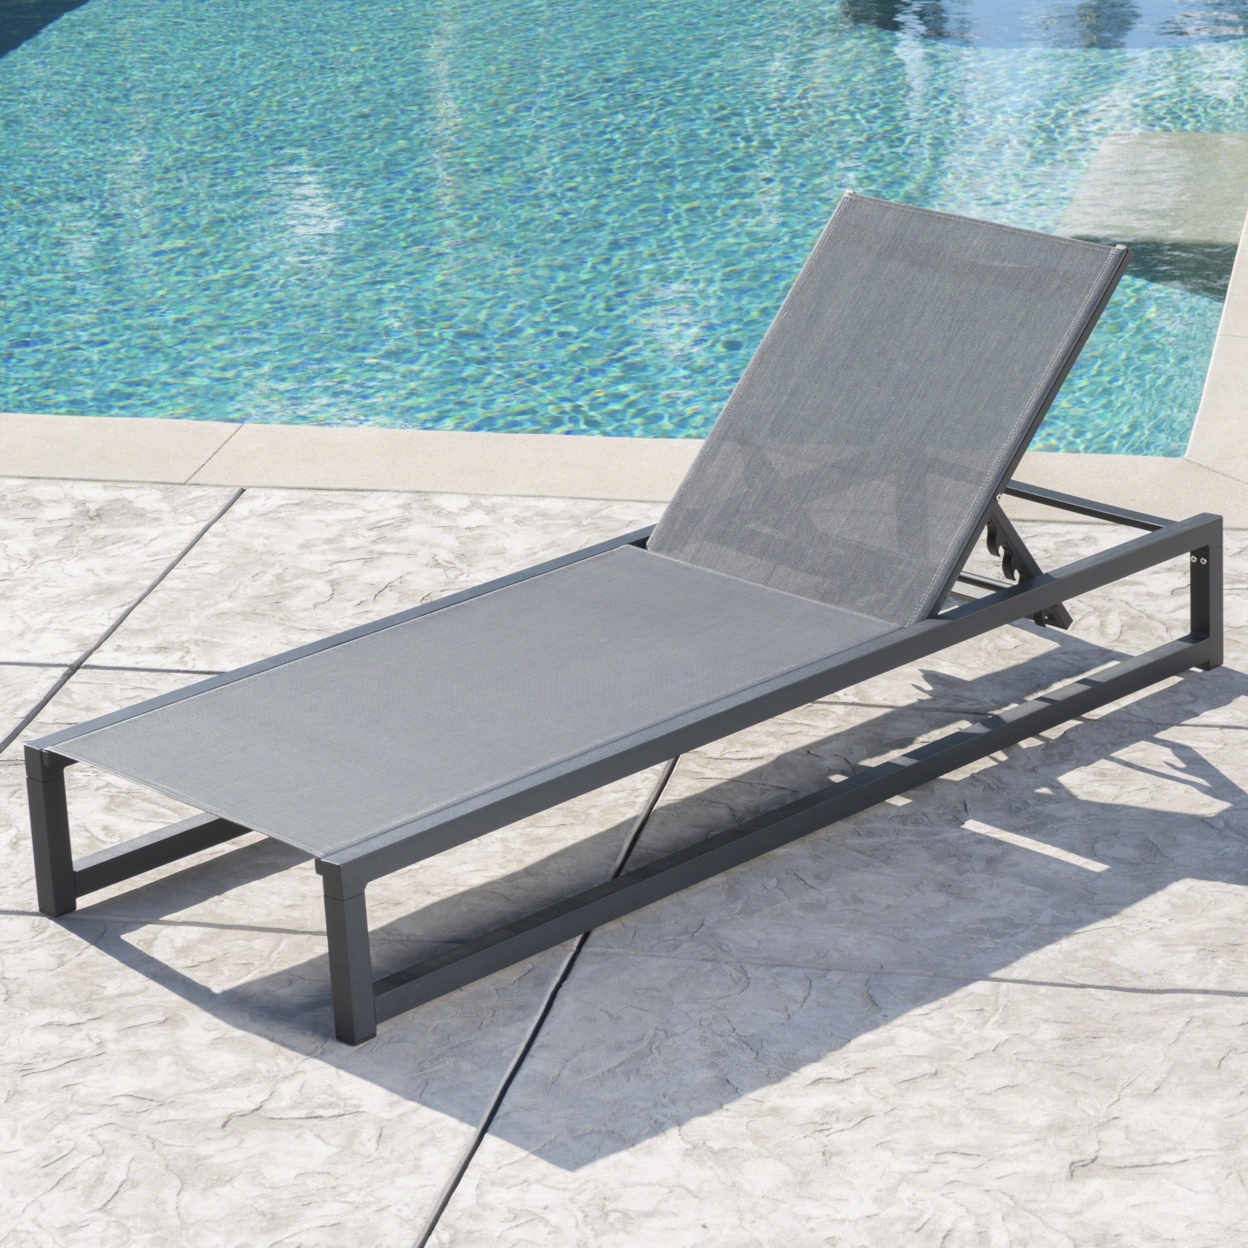 Mottetta Outdoor Finished Aluminum Framed Chaise Lounge With Mesh Body - Black/gray, Set Of 2